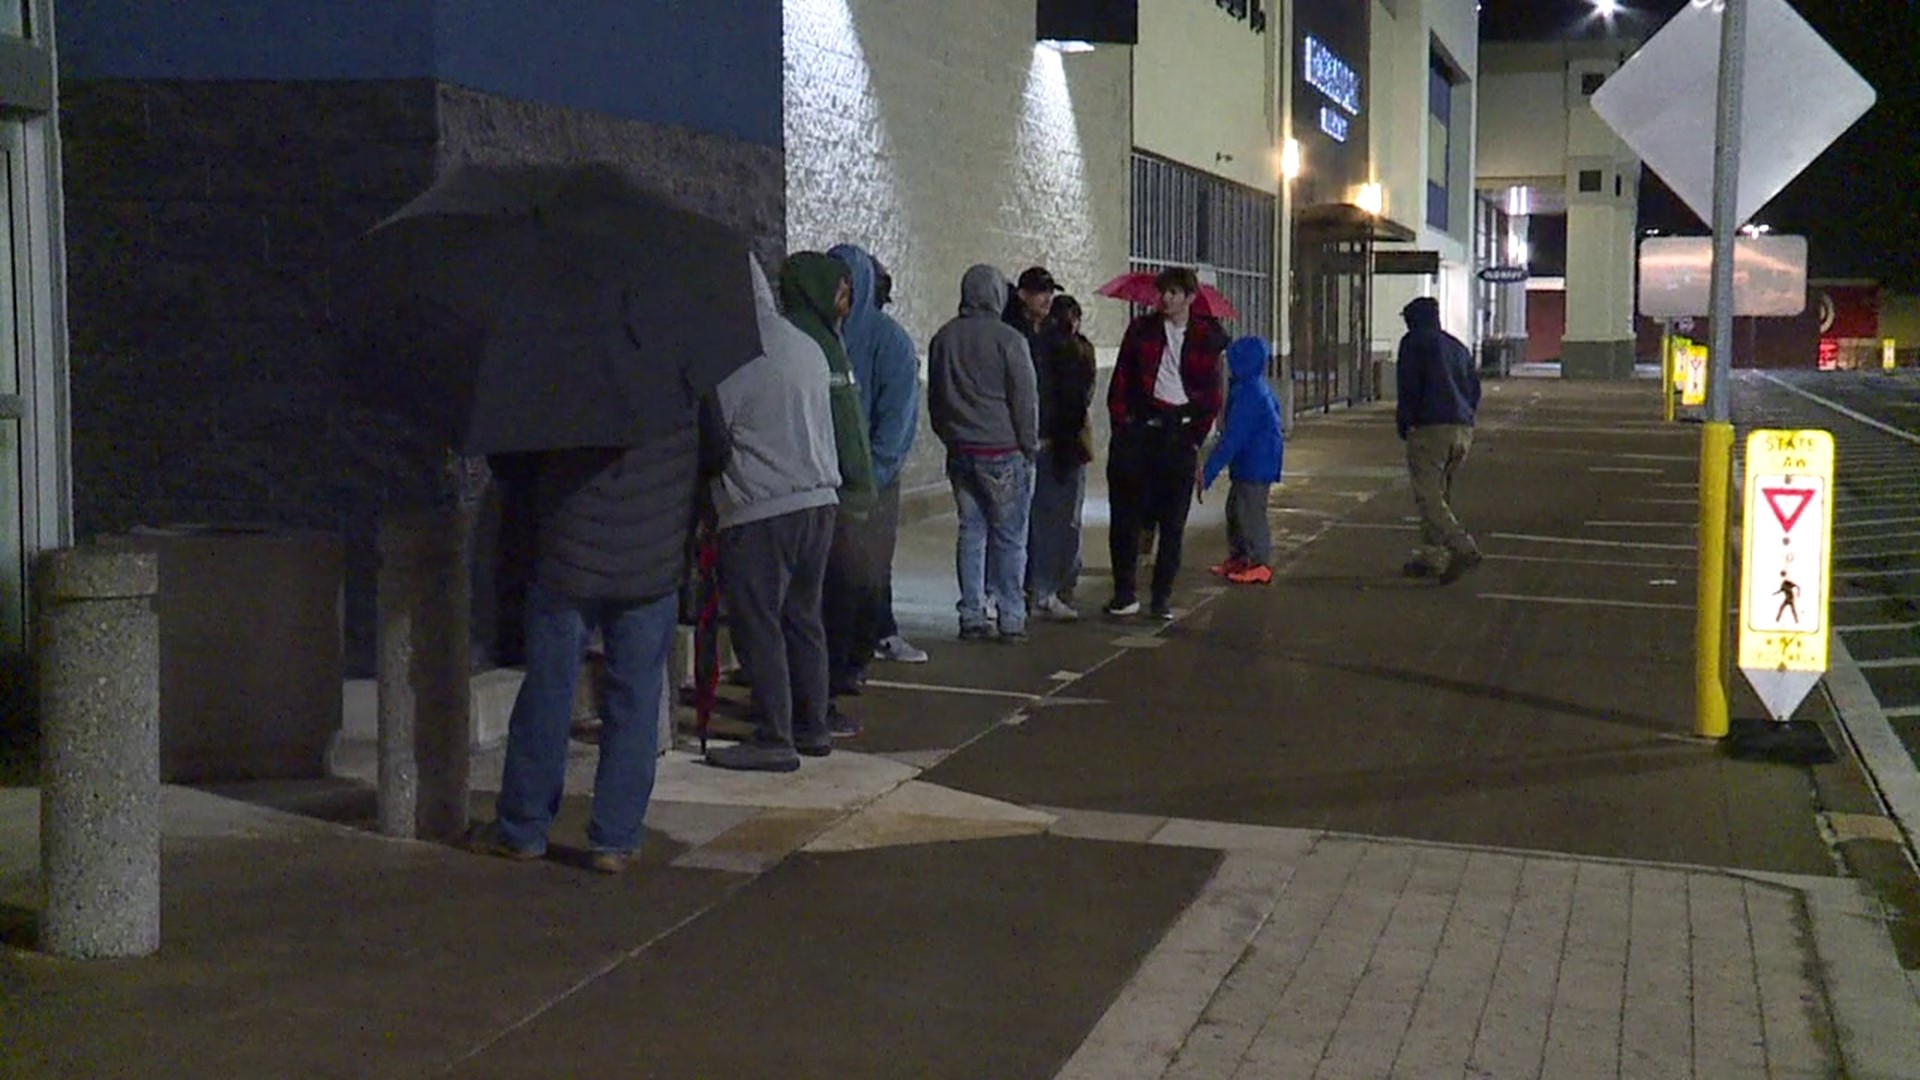 Shoppers looking for deals still shop in person on Black Friday.